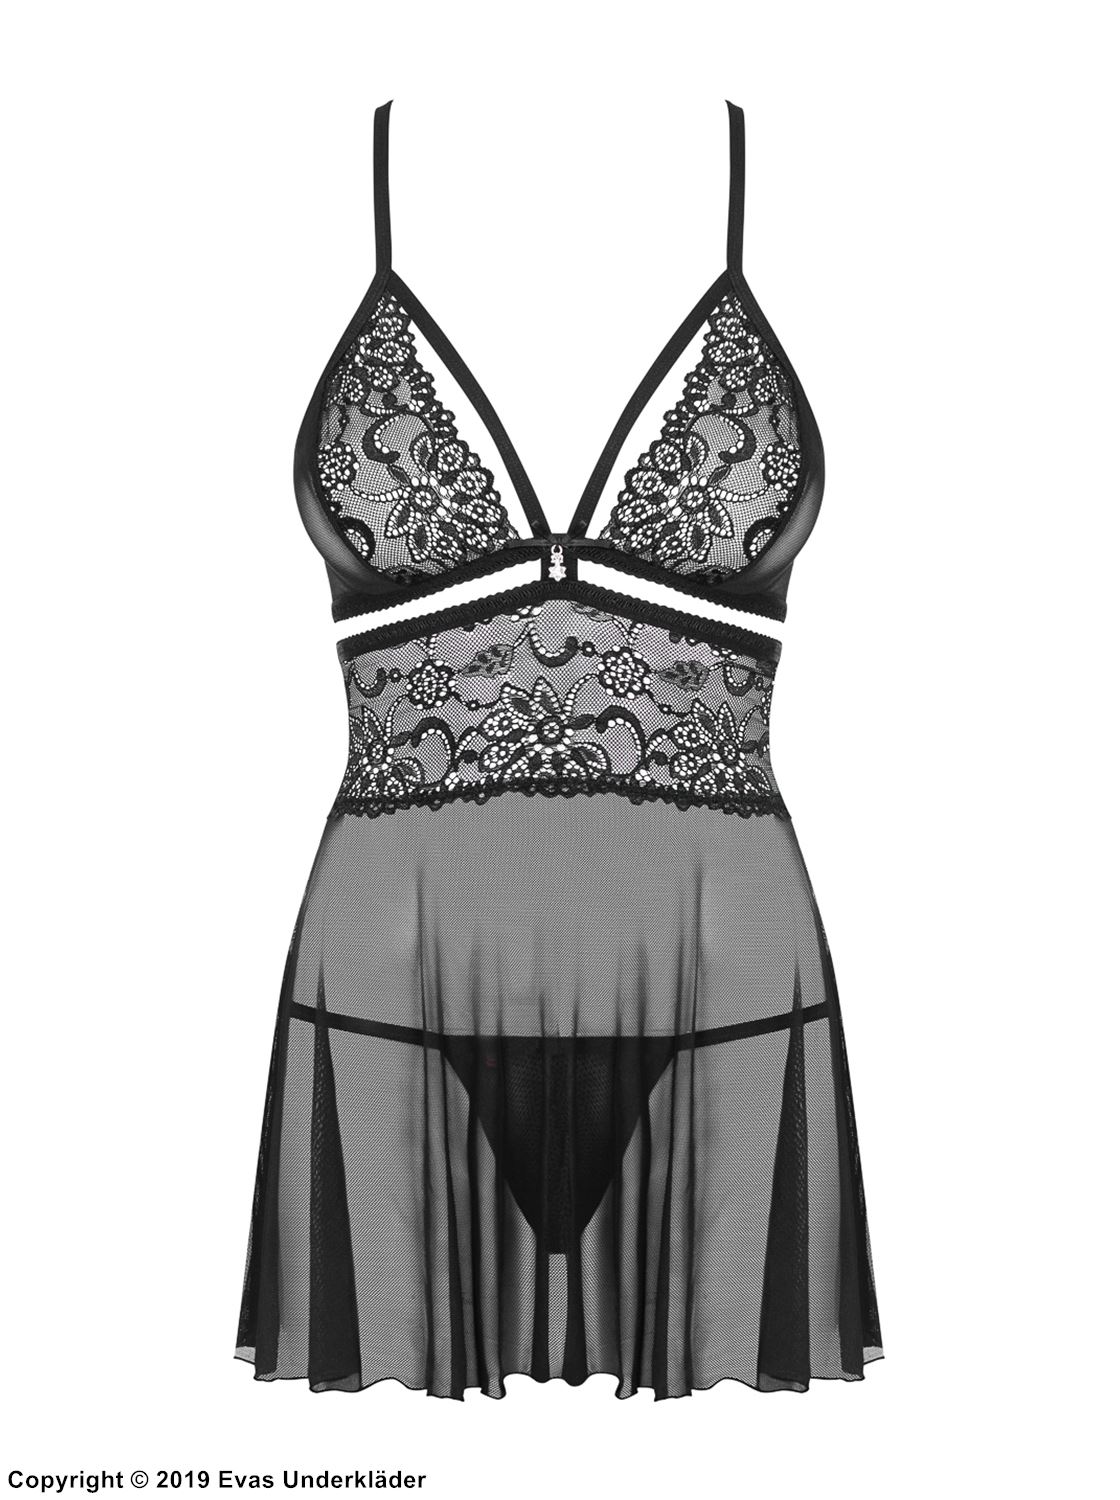 Seductive babydoll, lace overlay, straps over bust